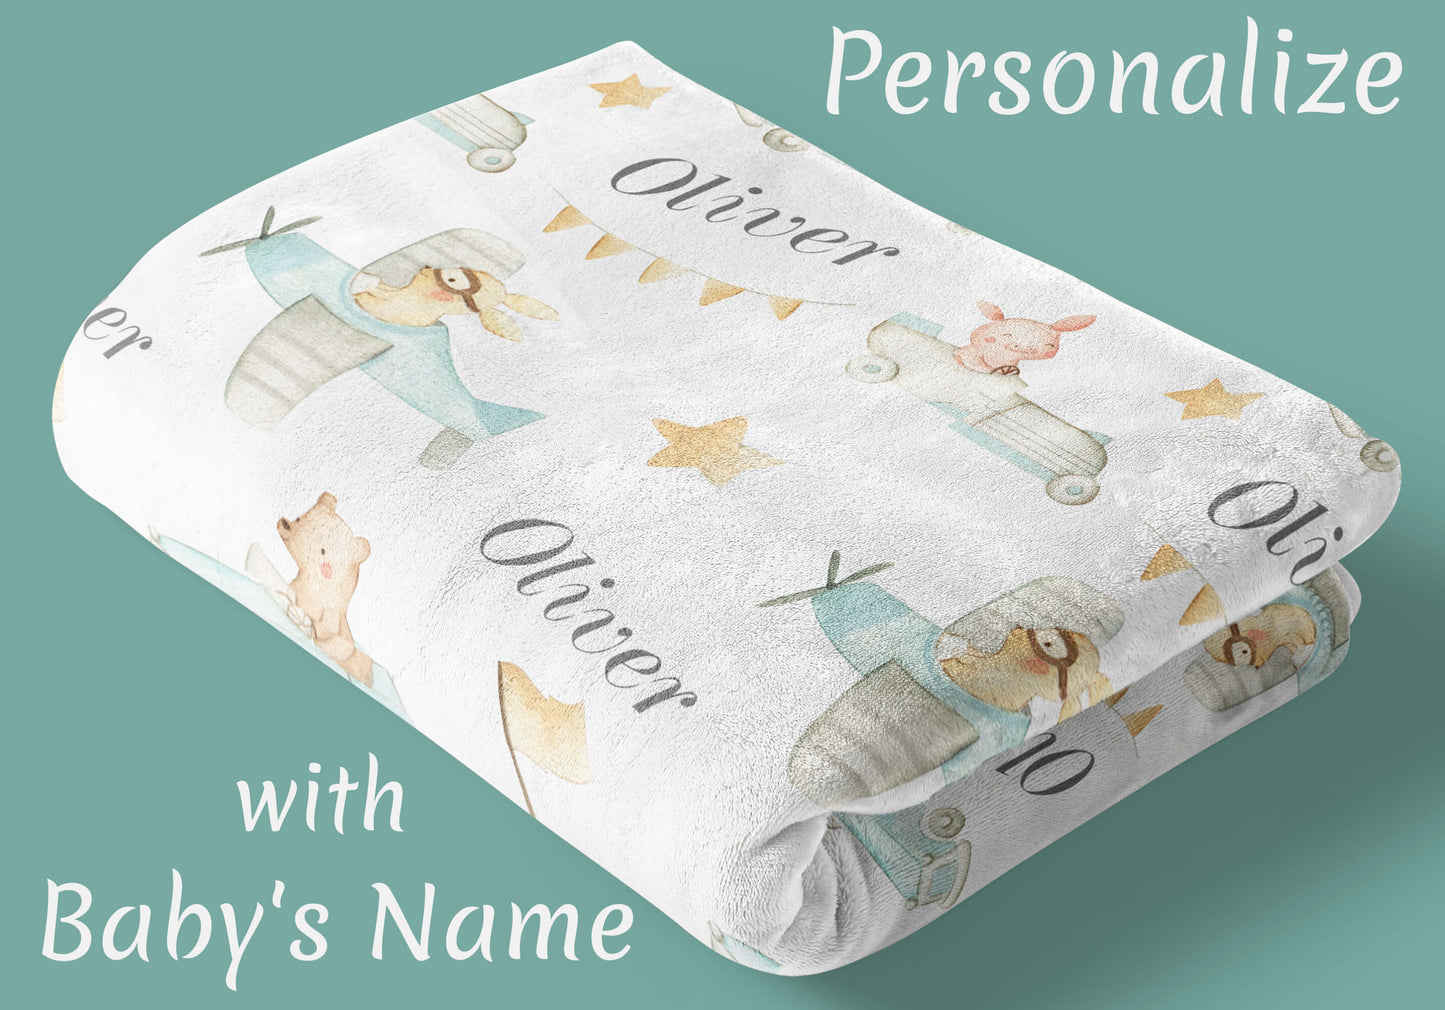 Retro Cars and Planes - Personalized Baby Blanket with Animals